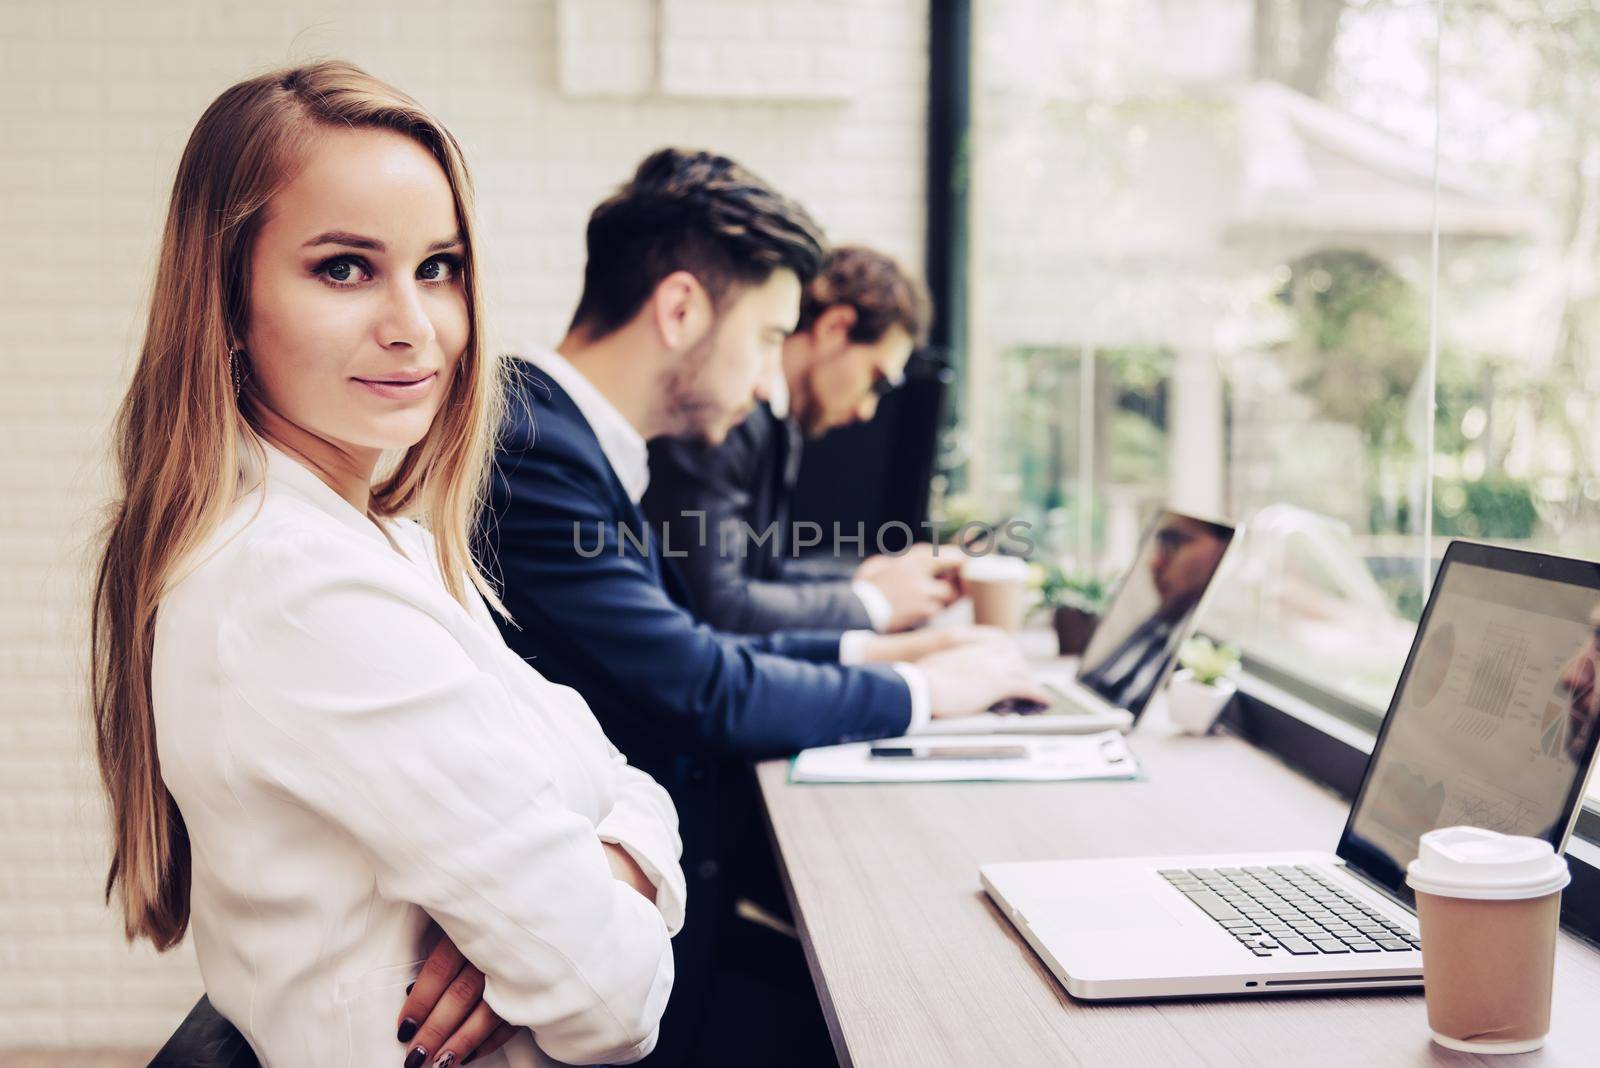 Business woman working with business team by laptop computer. Beauty and Technology concept. Smart lady and working woman theme. Office and happy life theme.